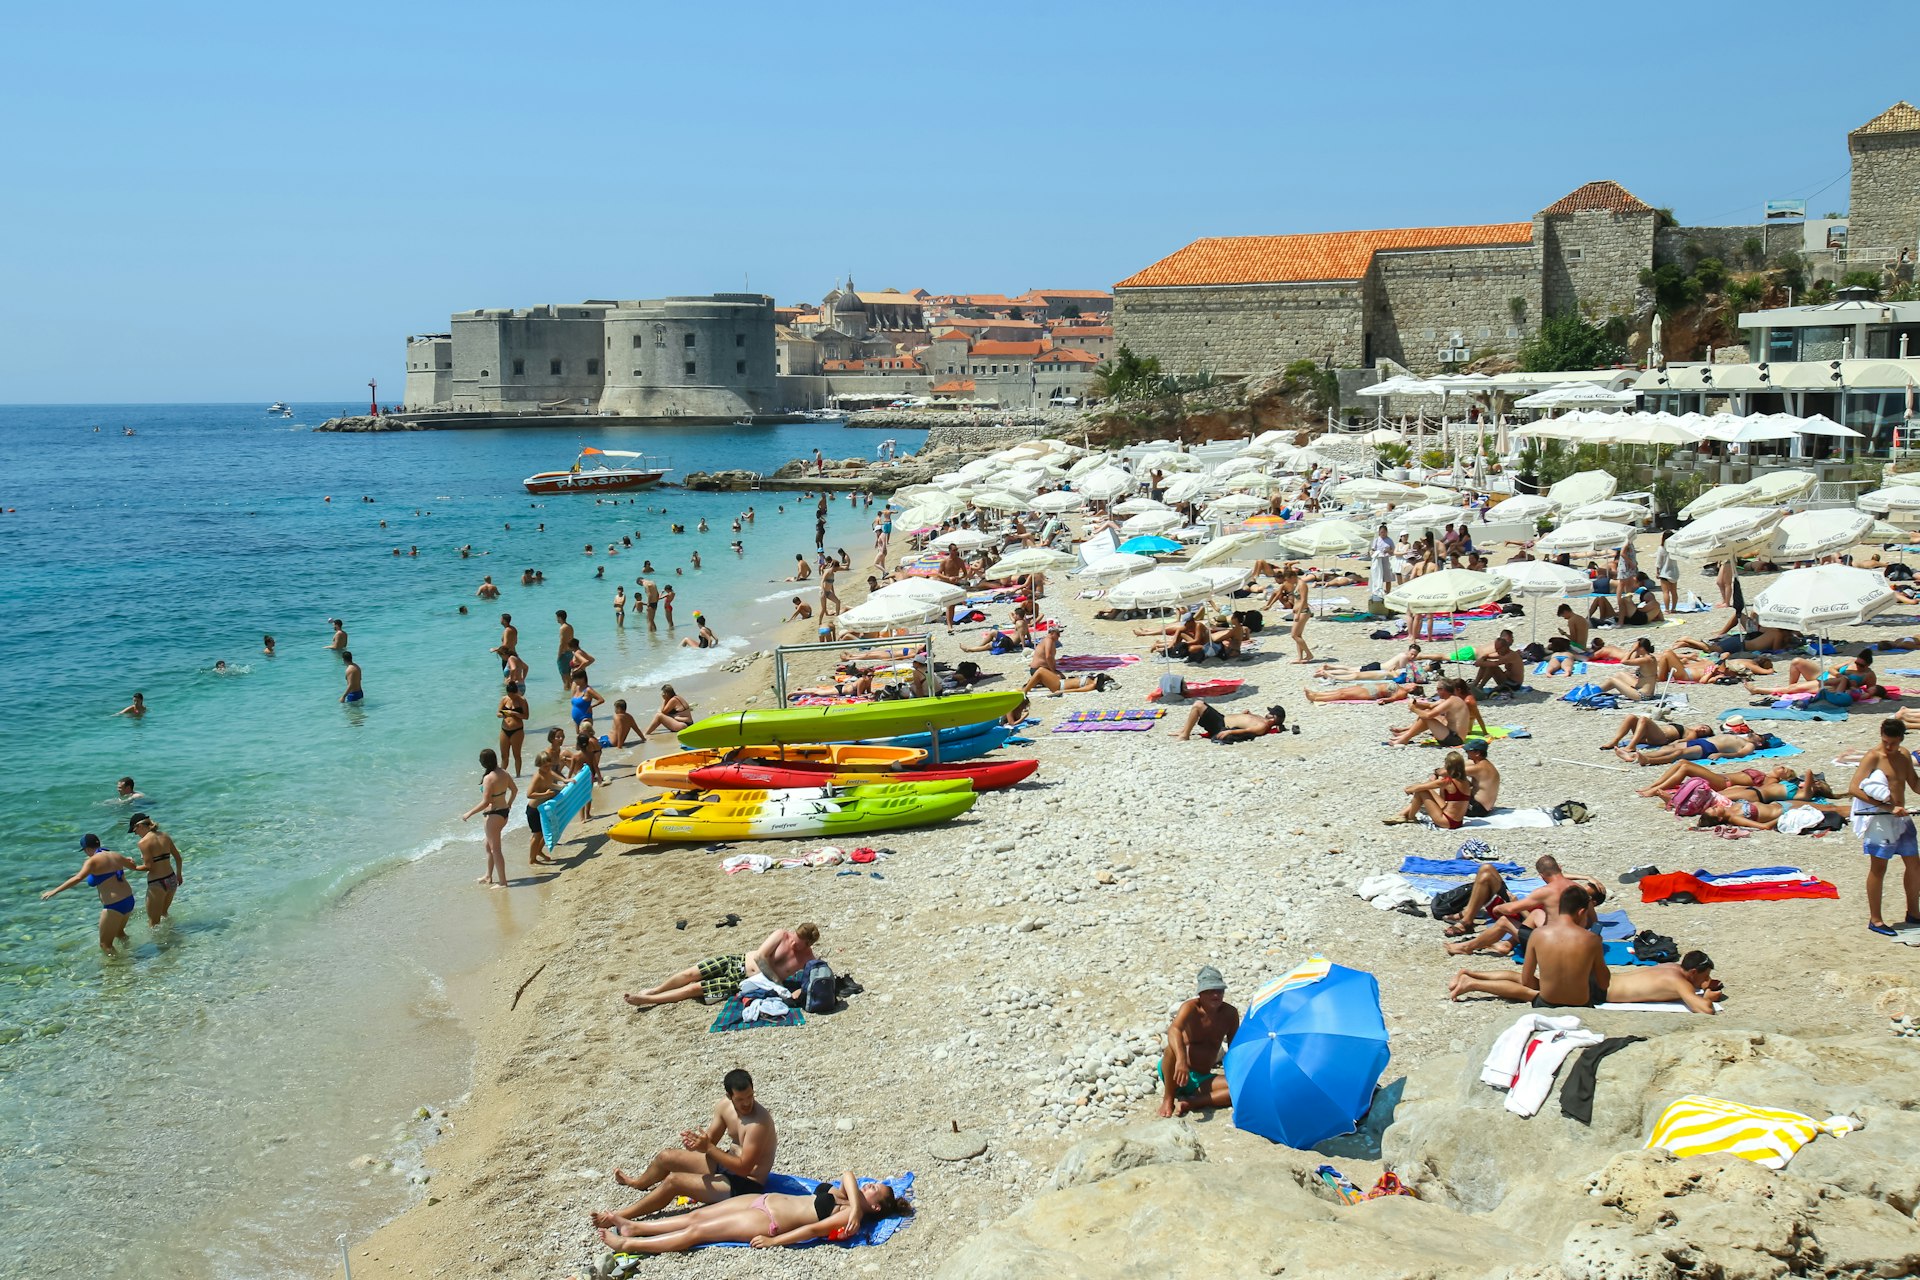 People swimming and sunbathing on the Banje sea beach, with the old town of Dubrovnik in the background.